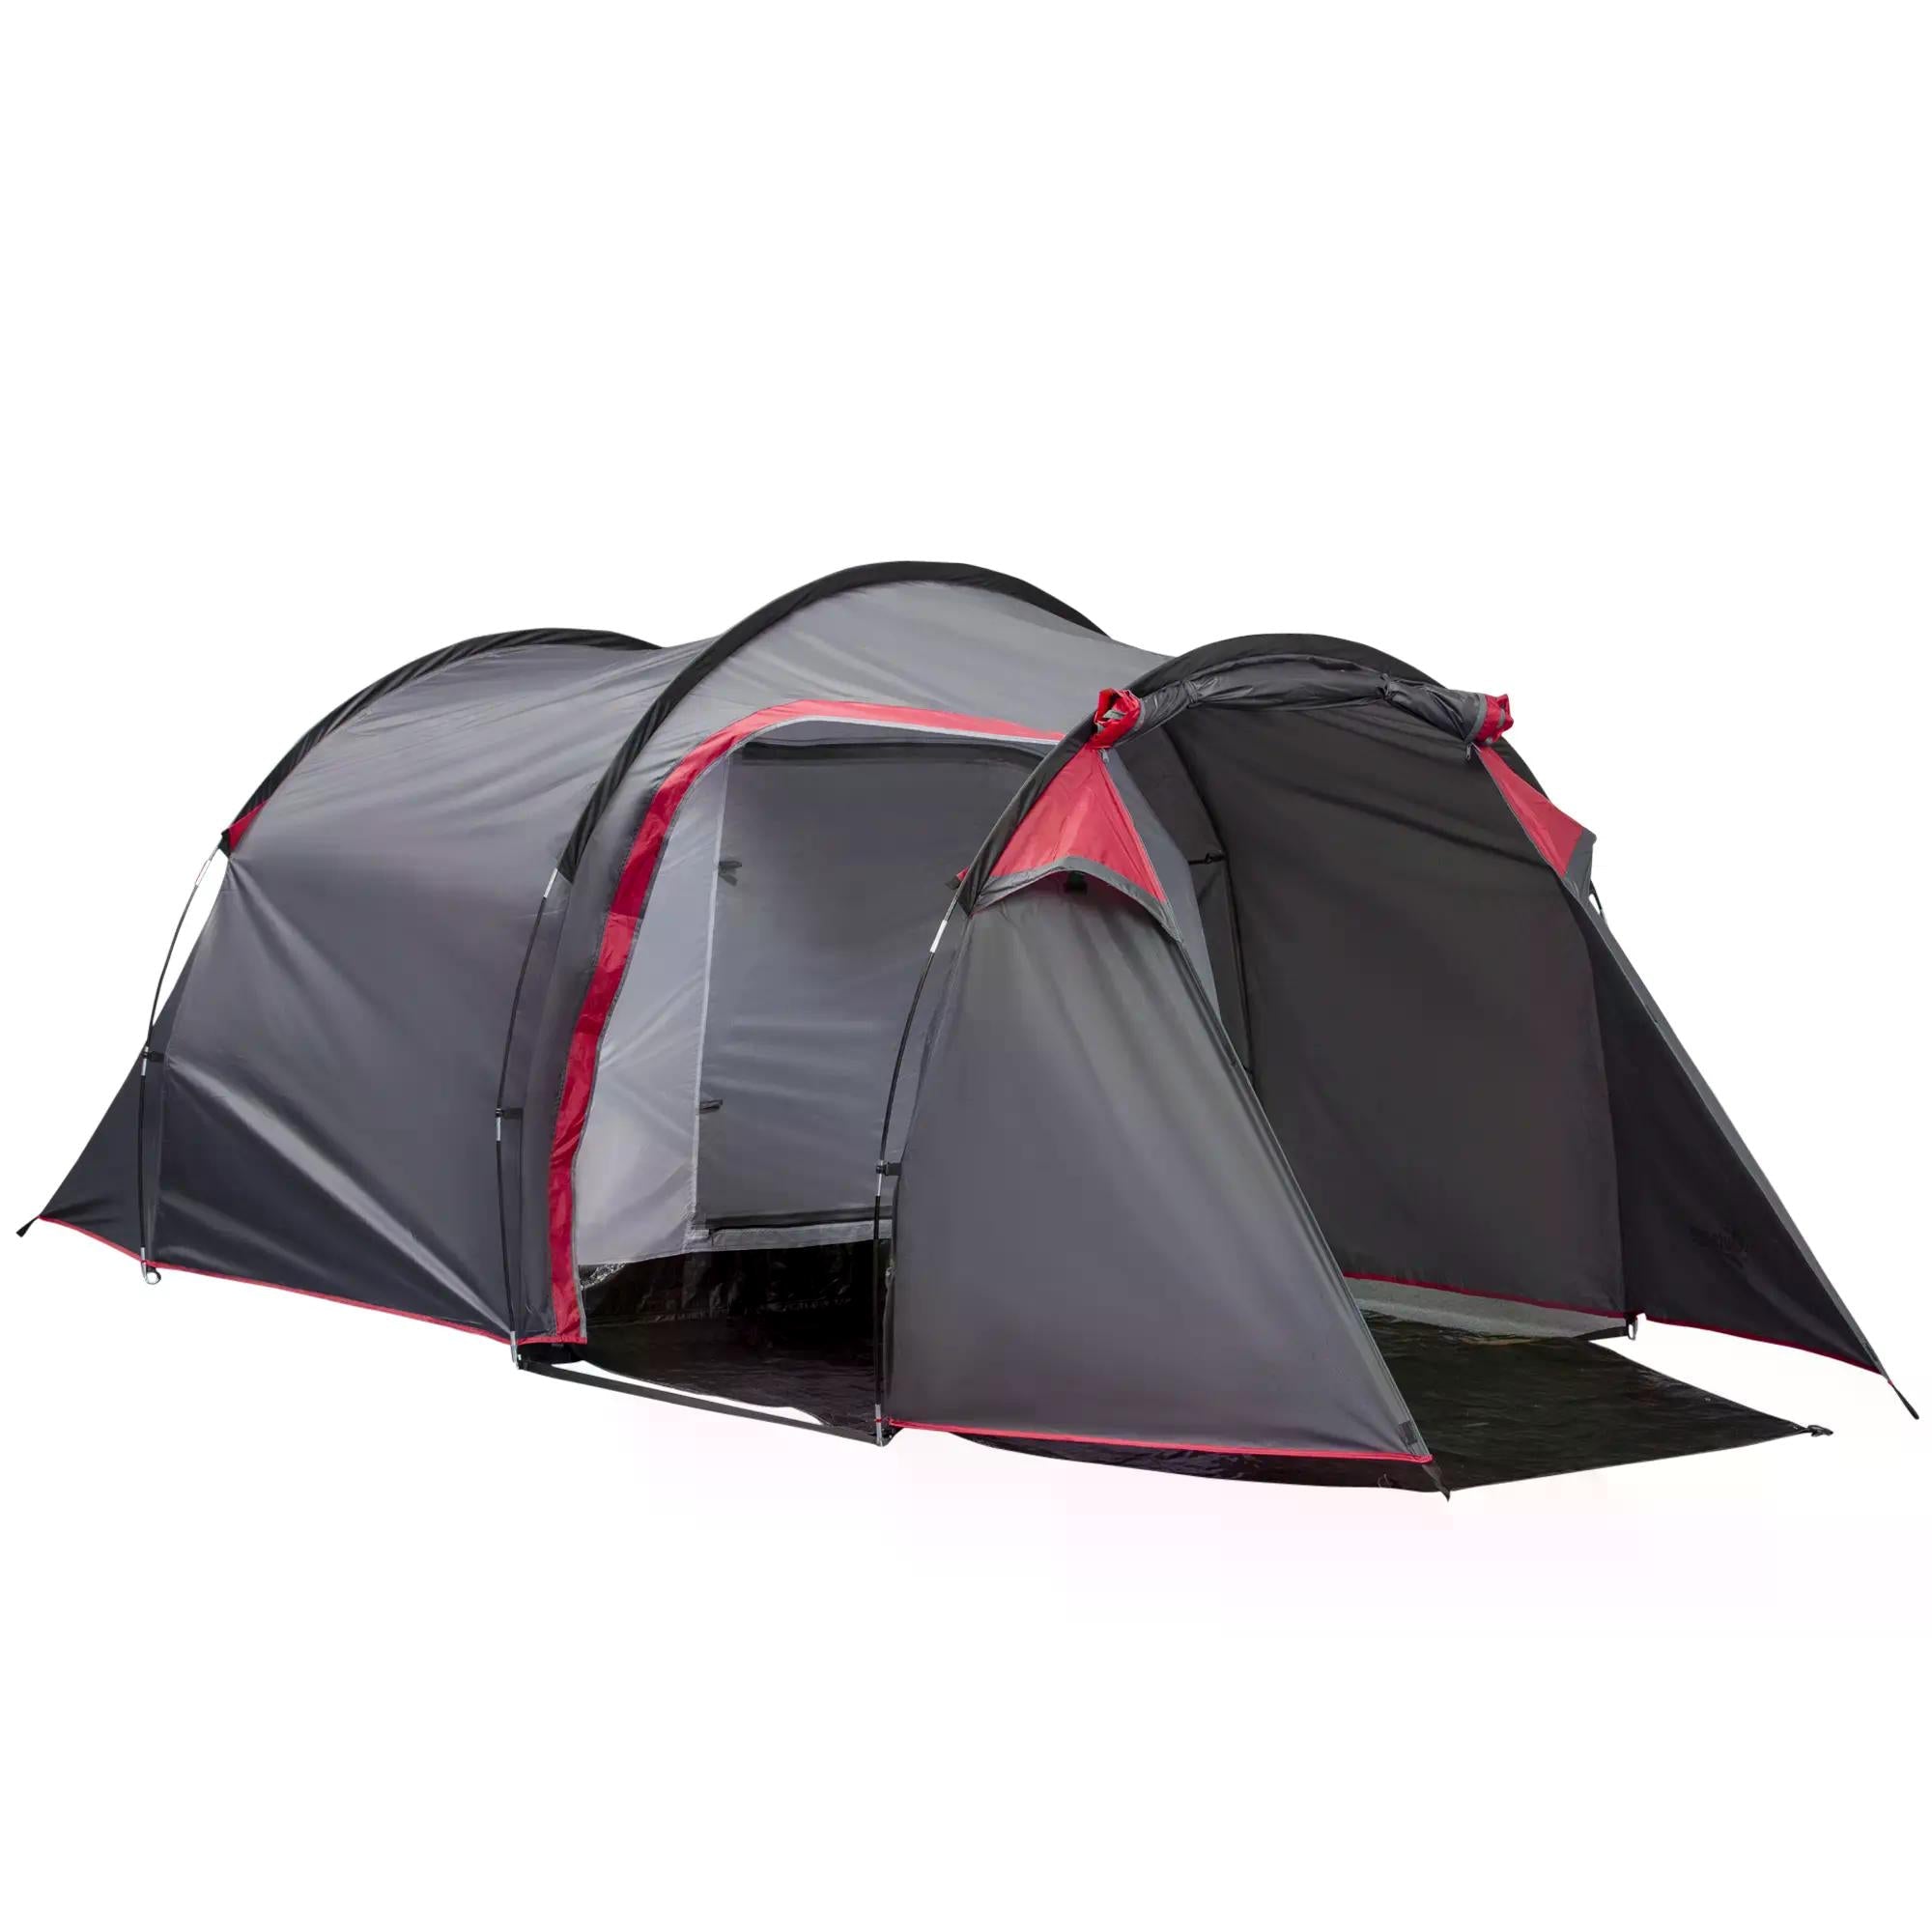 Camping Dome Tent 2 Room for 3-4 Person with Weatherproof Screen Room Vestibule Backpacking Tent Lightweight for Fishing & Hiking Dark Grey-1